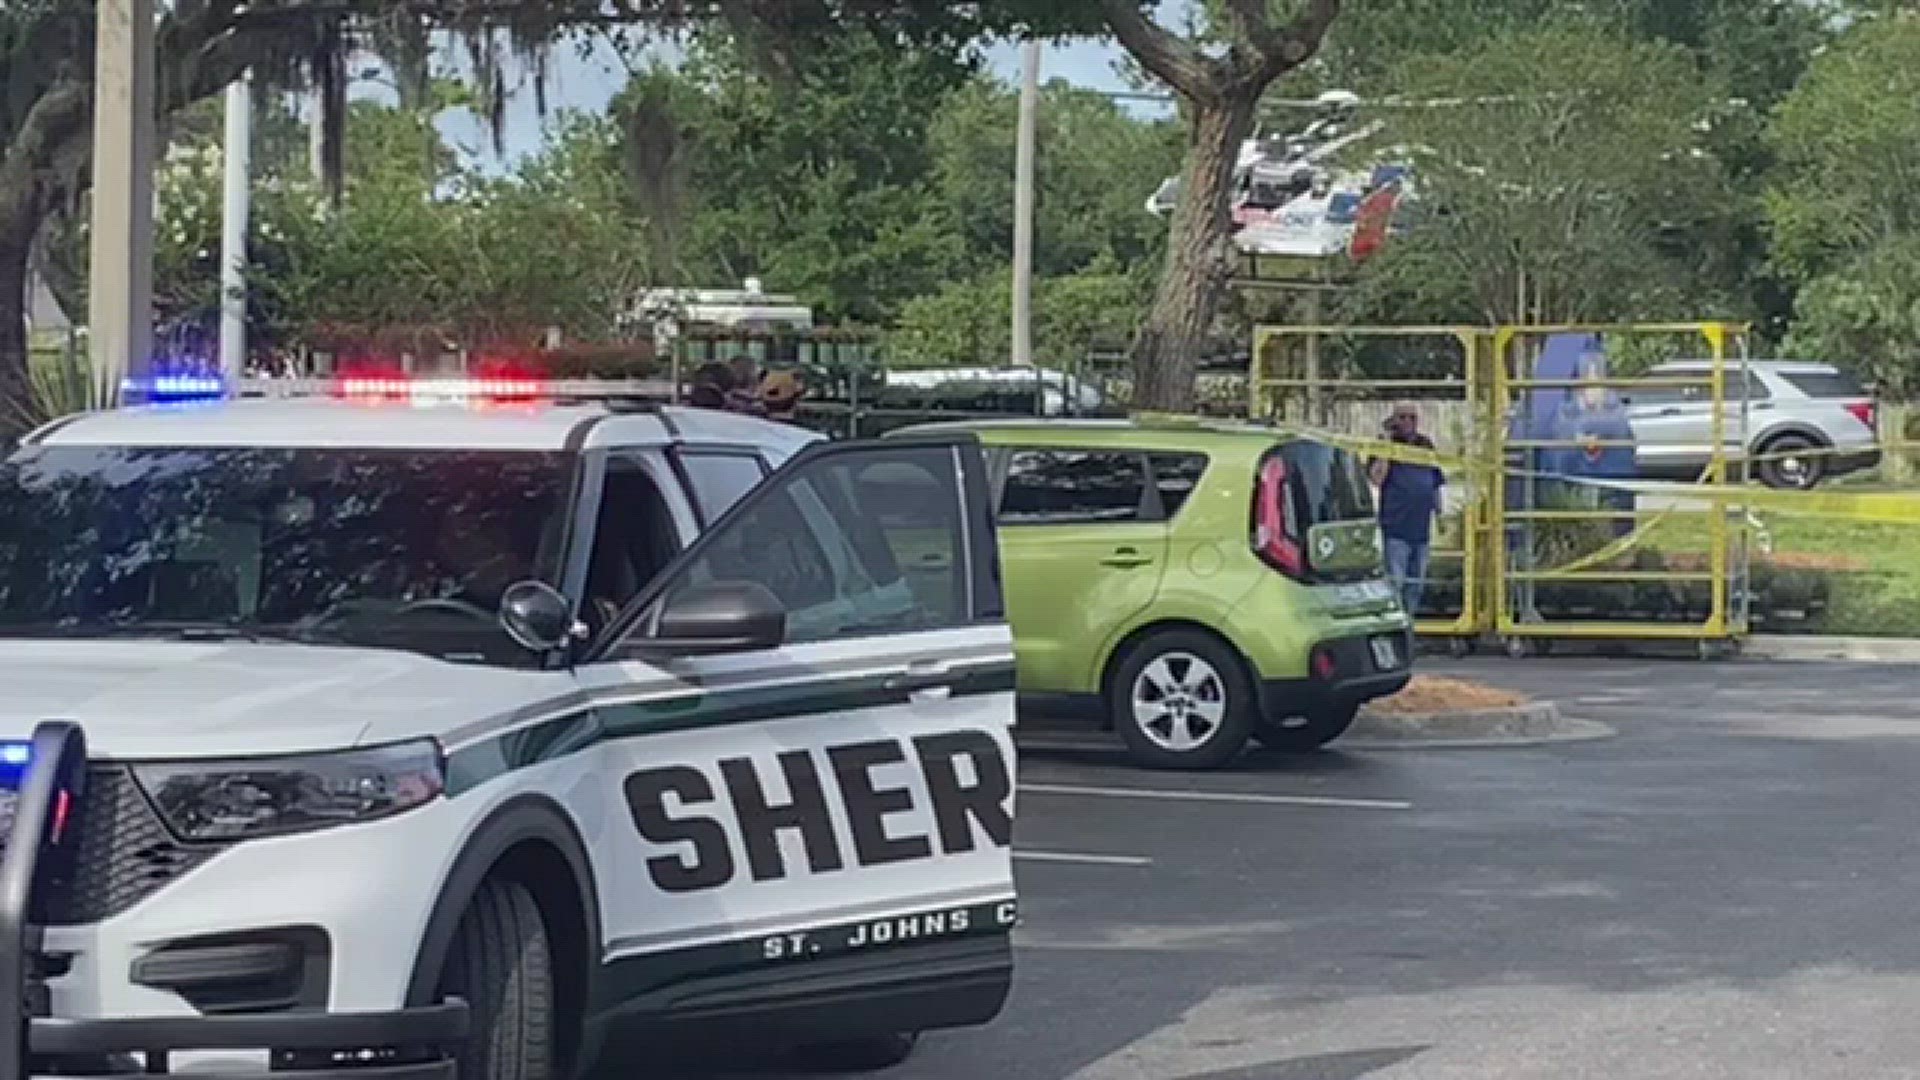 A patient could be seen life flighted from the scene of an incident in a Ponte Vedra shopping center.